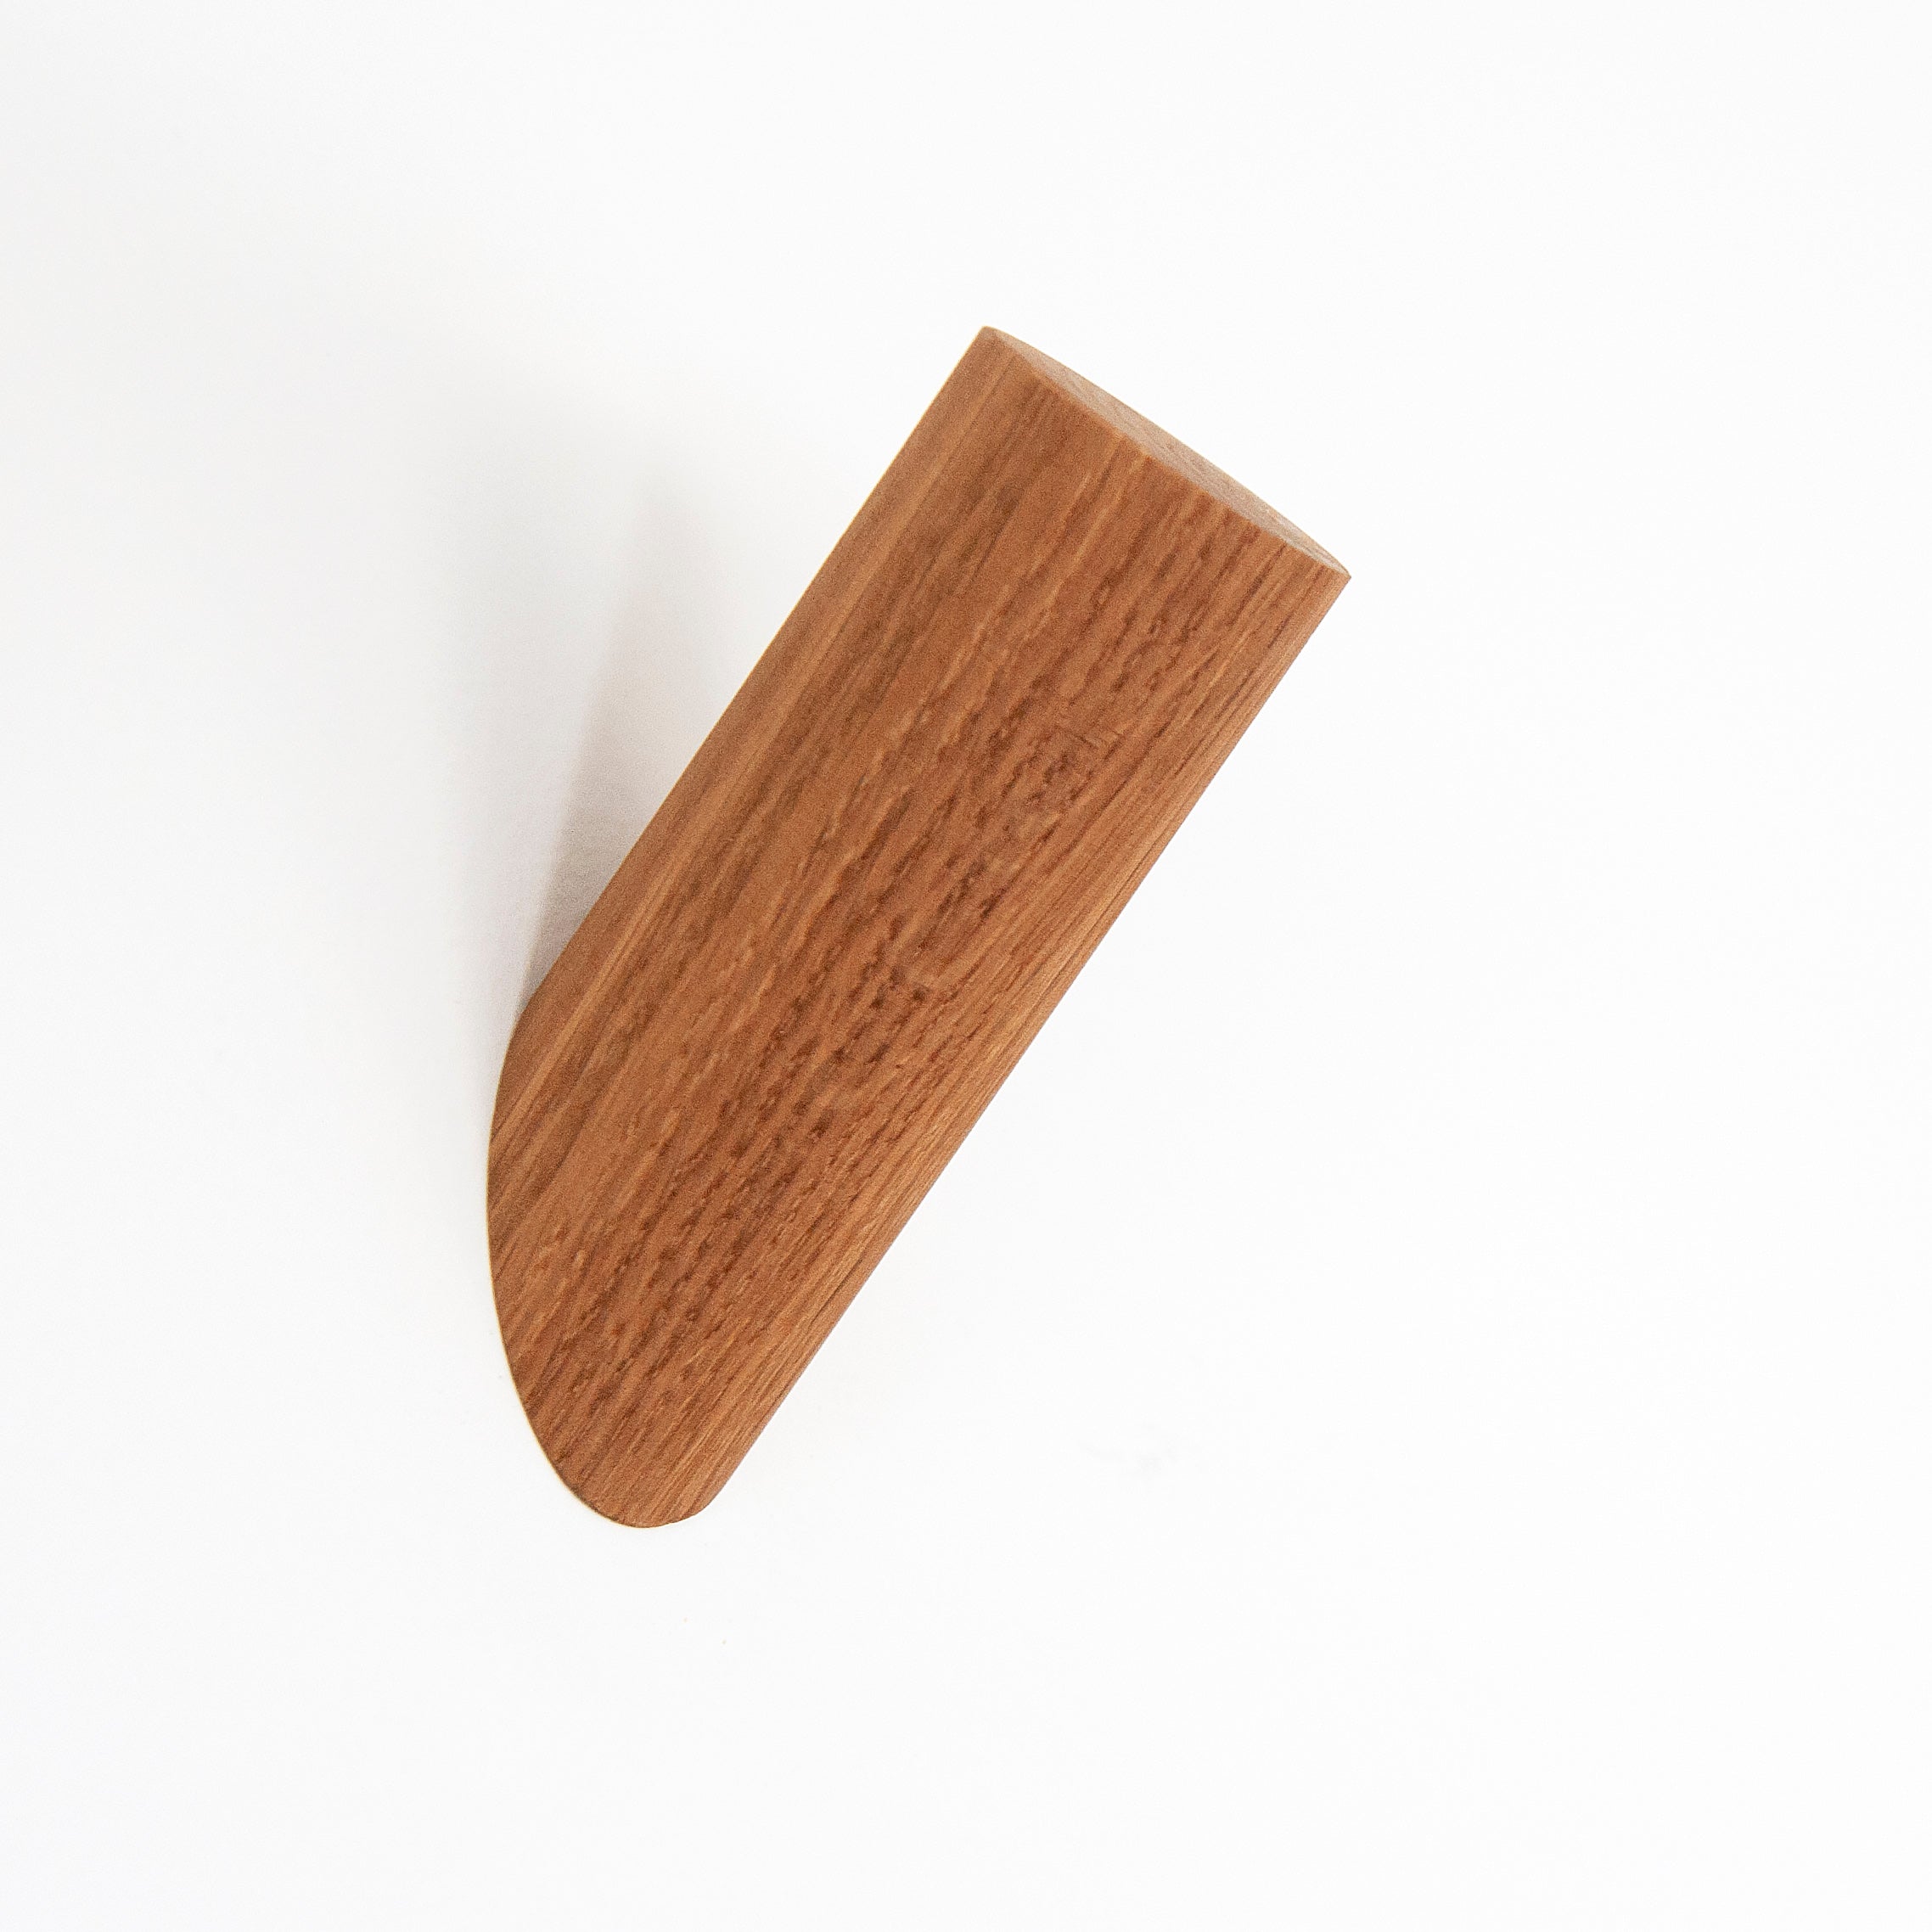 Luxury Oak & Wooden Handles - Designed and made in NZ by C S Studios